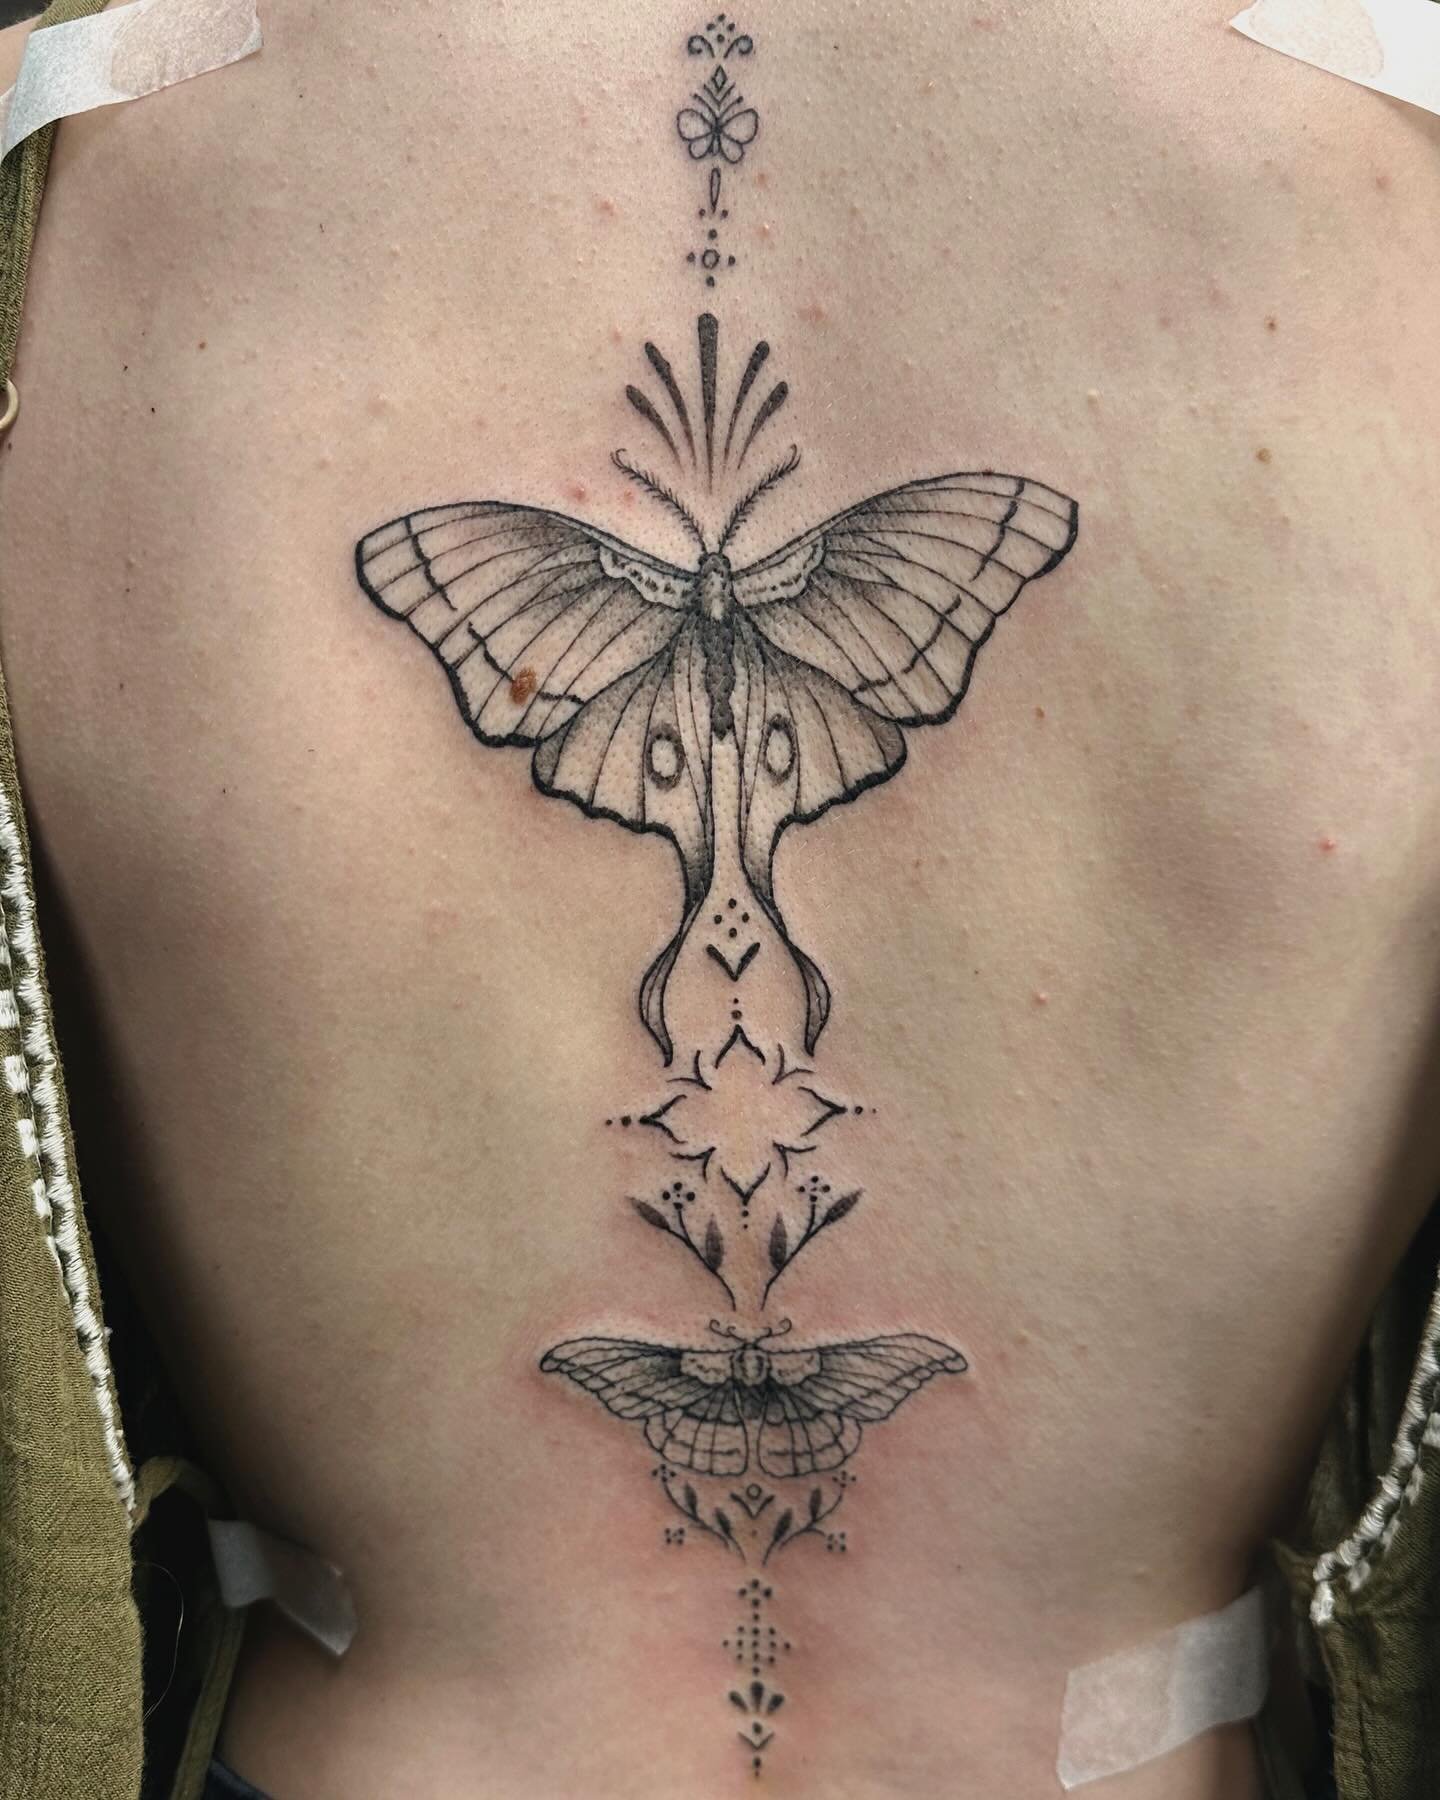 ⚜️back adornment⚜️
Thanks so much for coming in!!
.
.
.
.
.
.
.
.
.
.
#tattoo #backtattoo #moth #lunarmoth #pretty #witchy